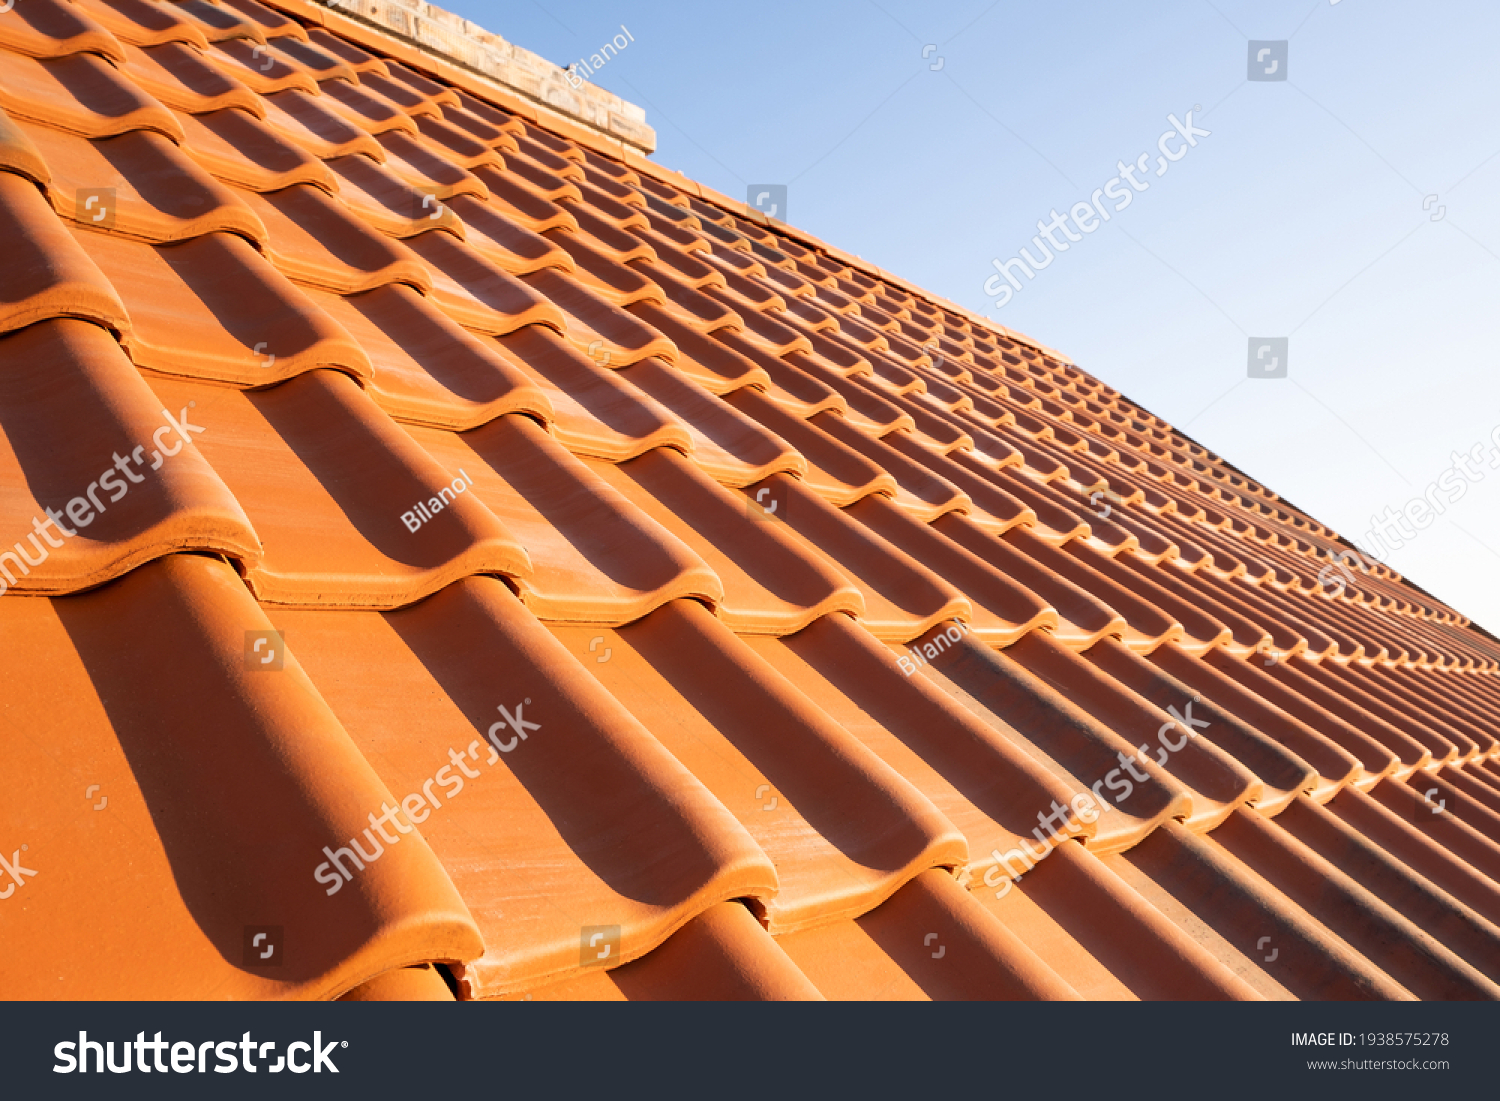 Overlapping rows of yellow ceramic roofing tiles covering residential building roof. #1938575278